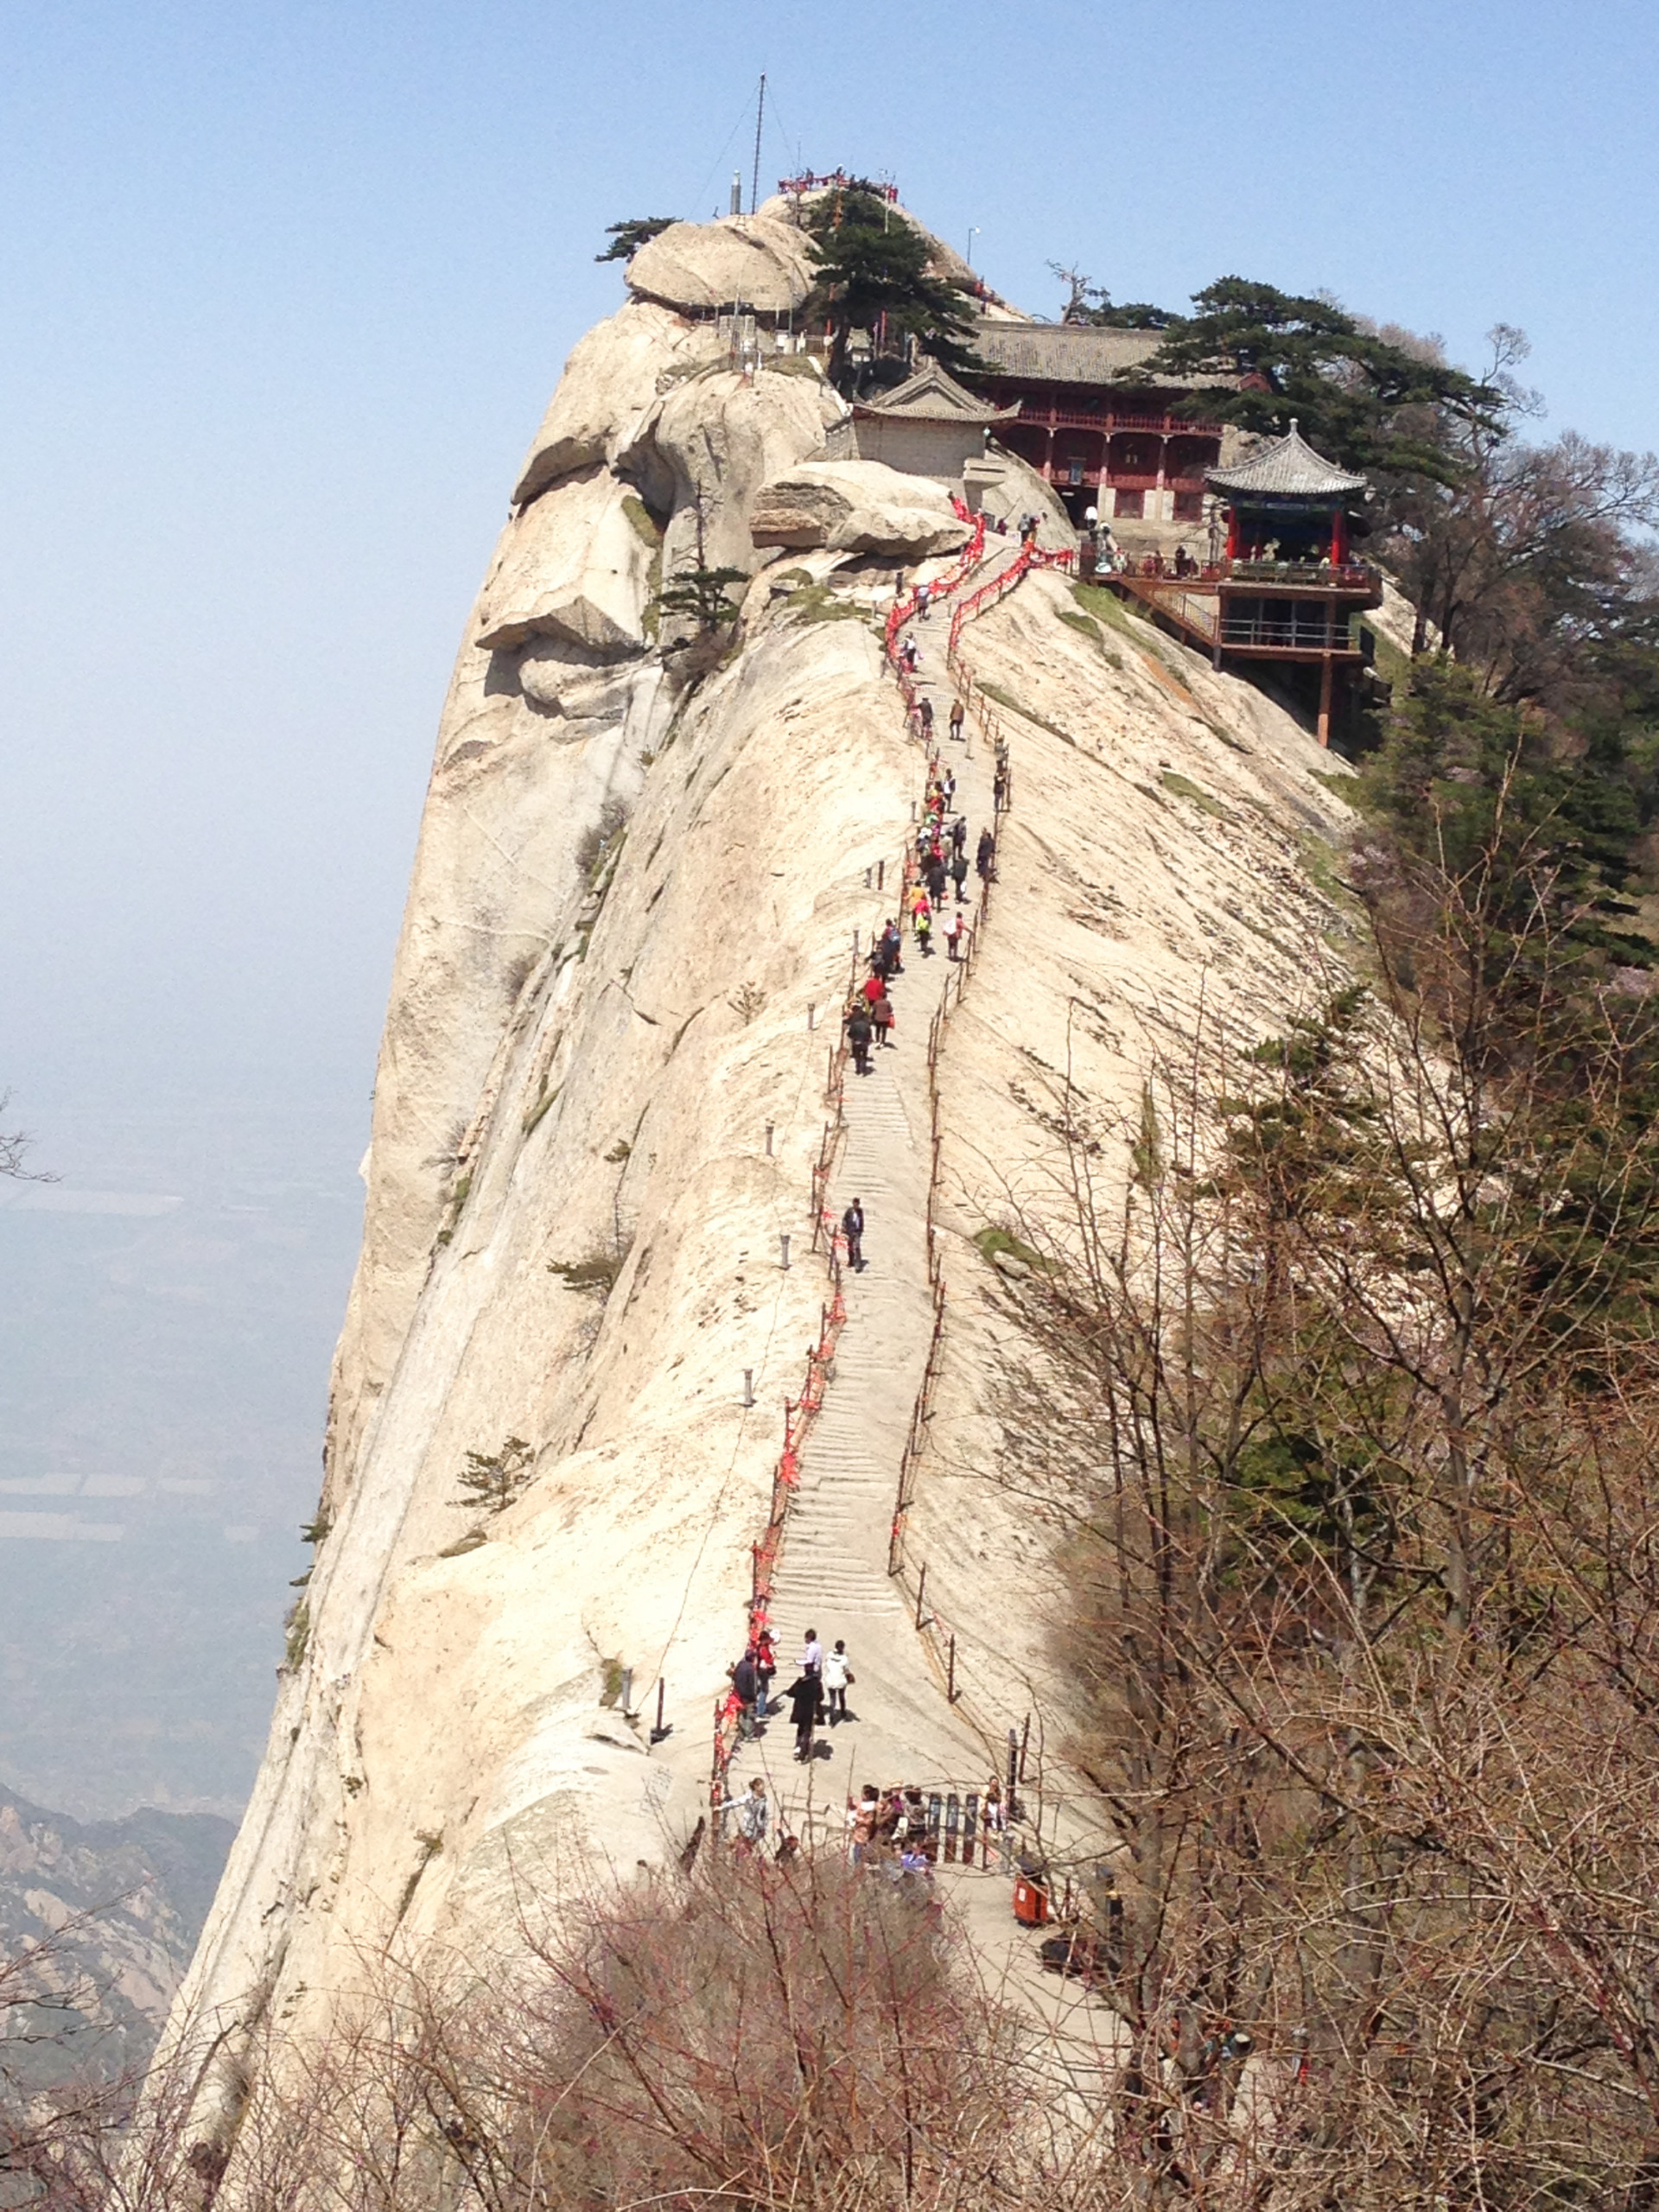 You can get a cup of tea at Cuiyun Palace on the west peak of Mount Hua.